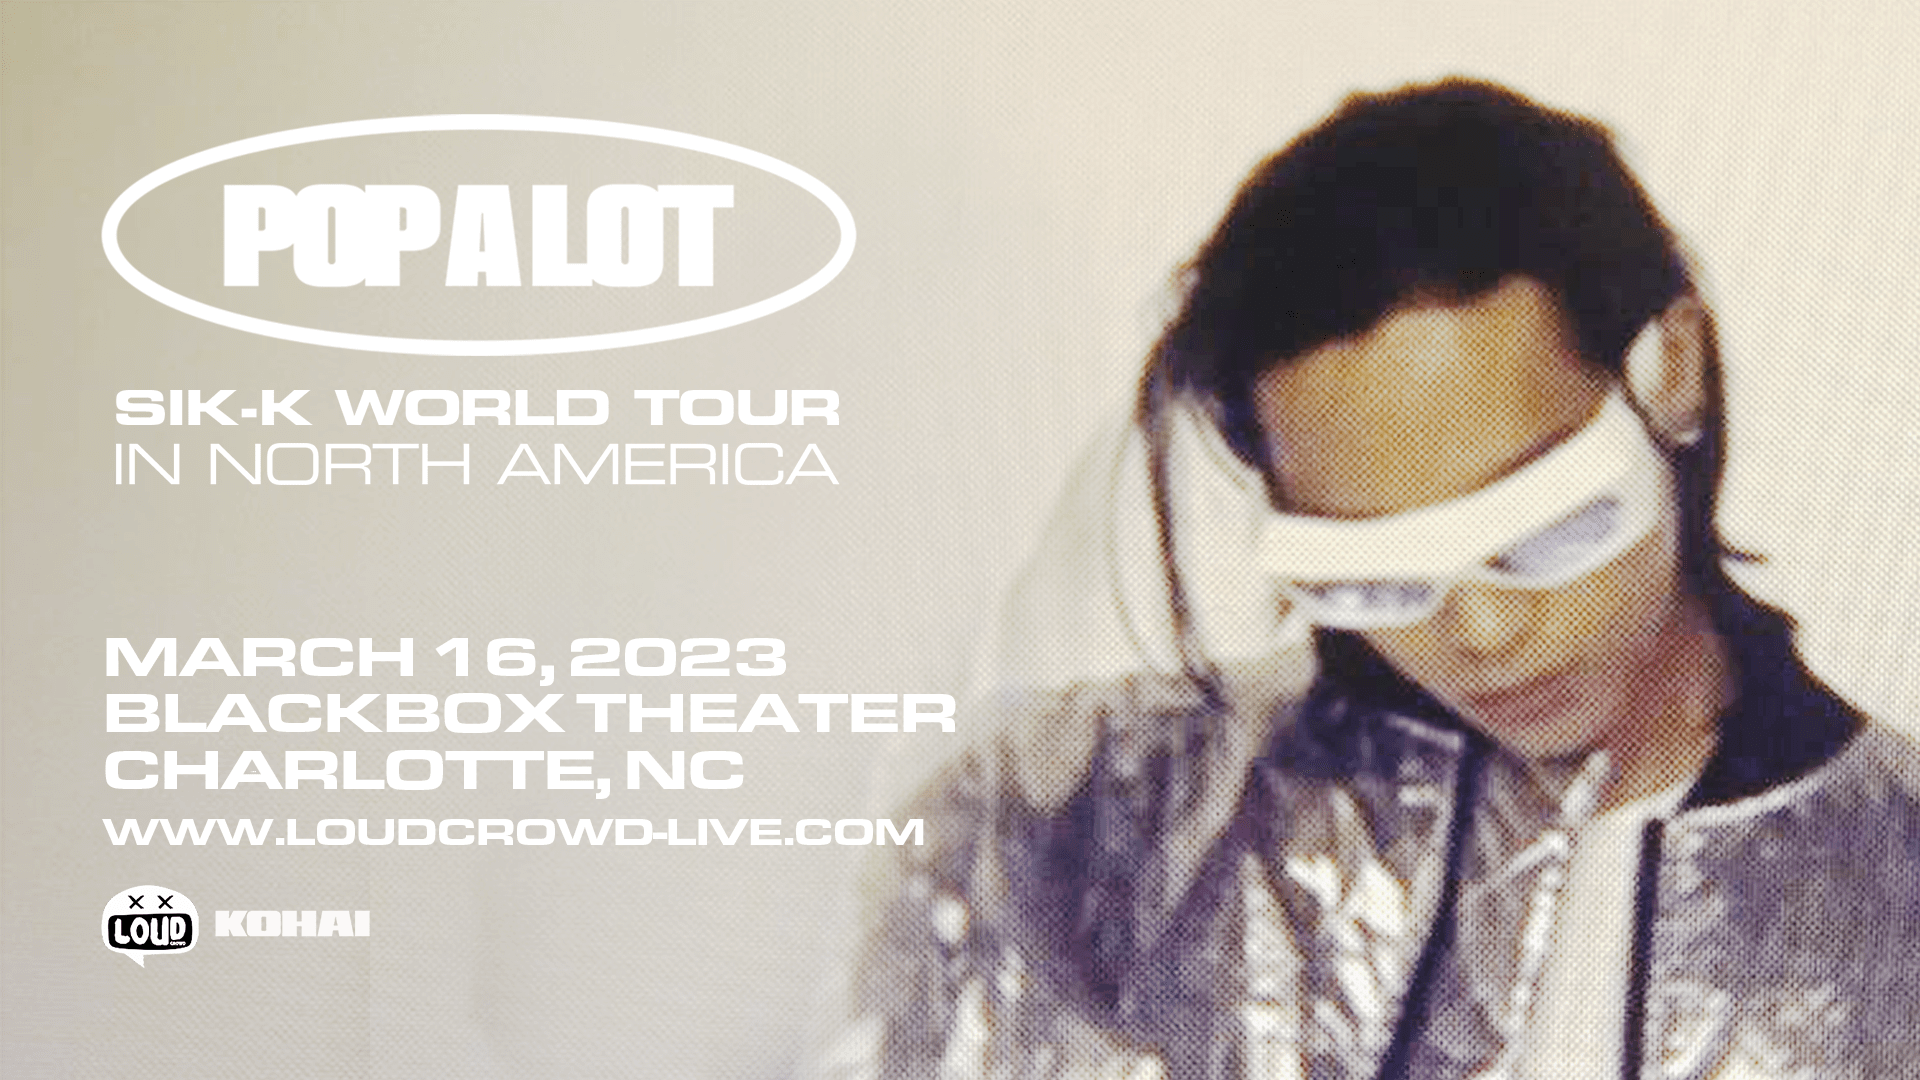 POP A LOT SikK World Tour Tickets at Black Box Theatre in Charlotte